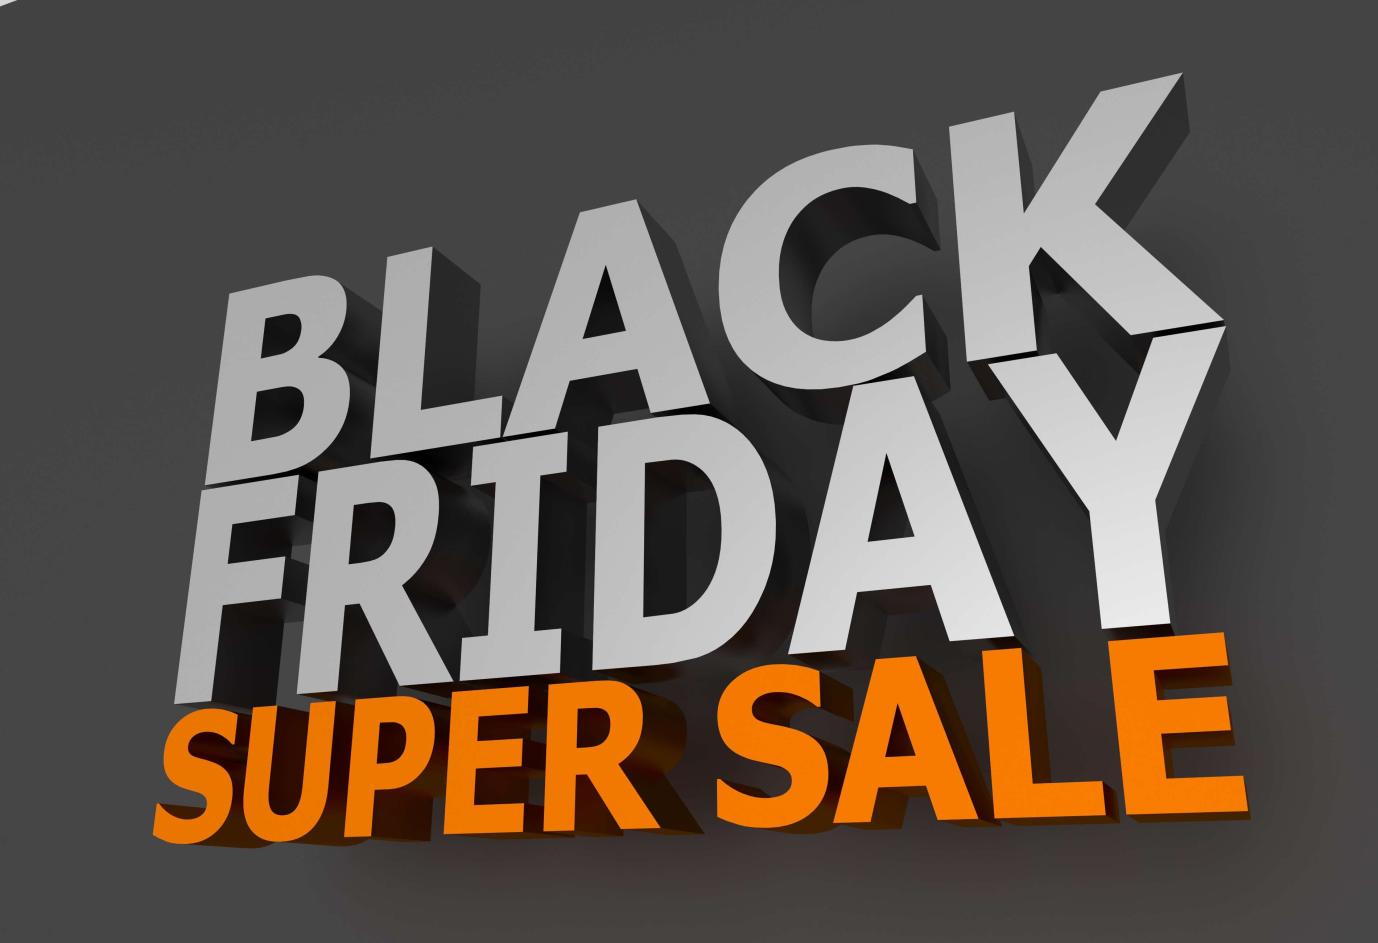 Black Friday Deals: Are They Worth The Hype?